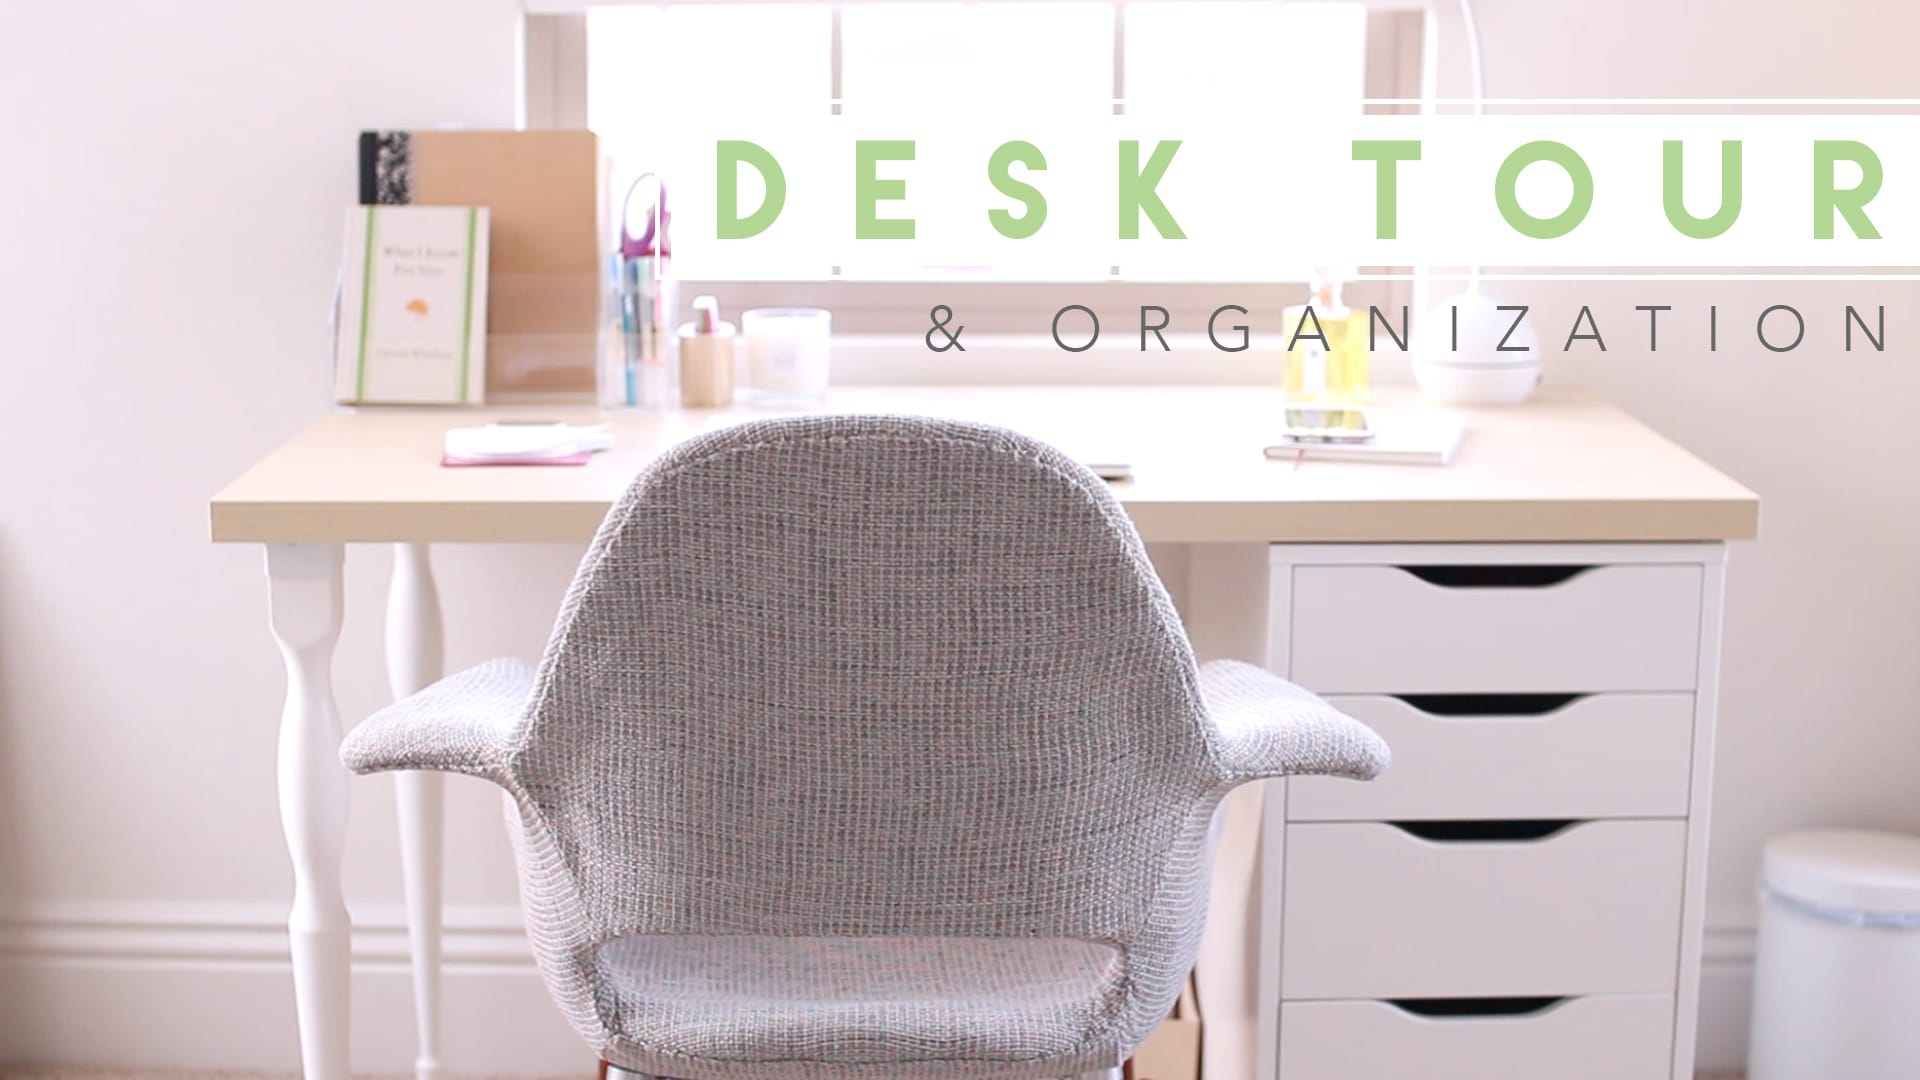 My Home Office Tour and Desk Organization 